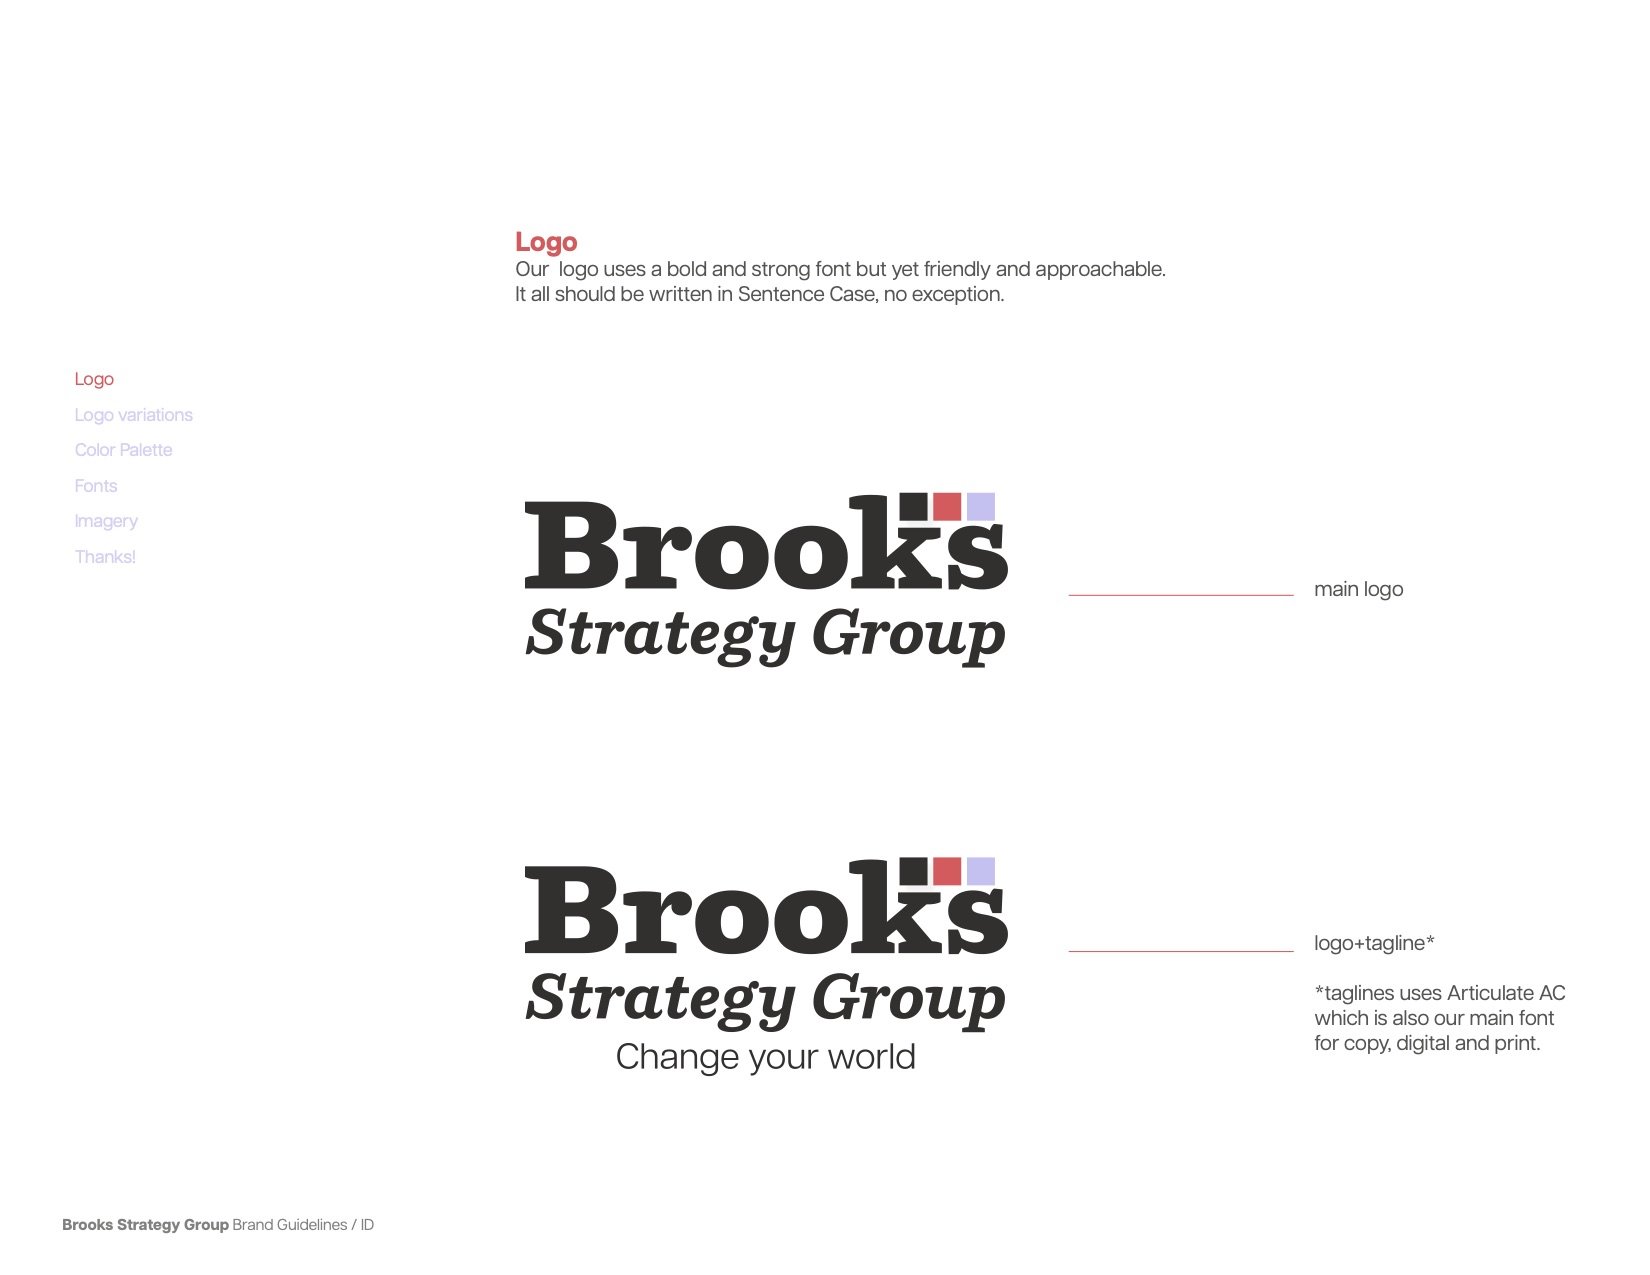 Brooks-brand-guidelines-Final Review page 7.jpg